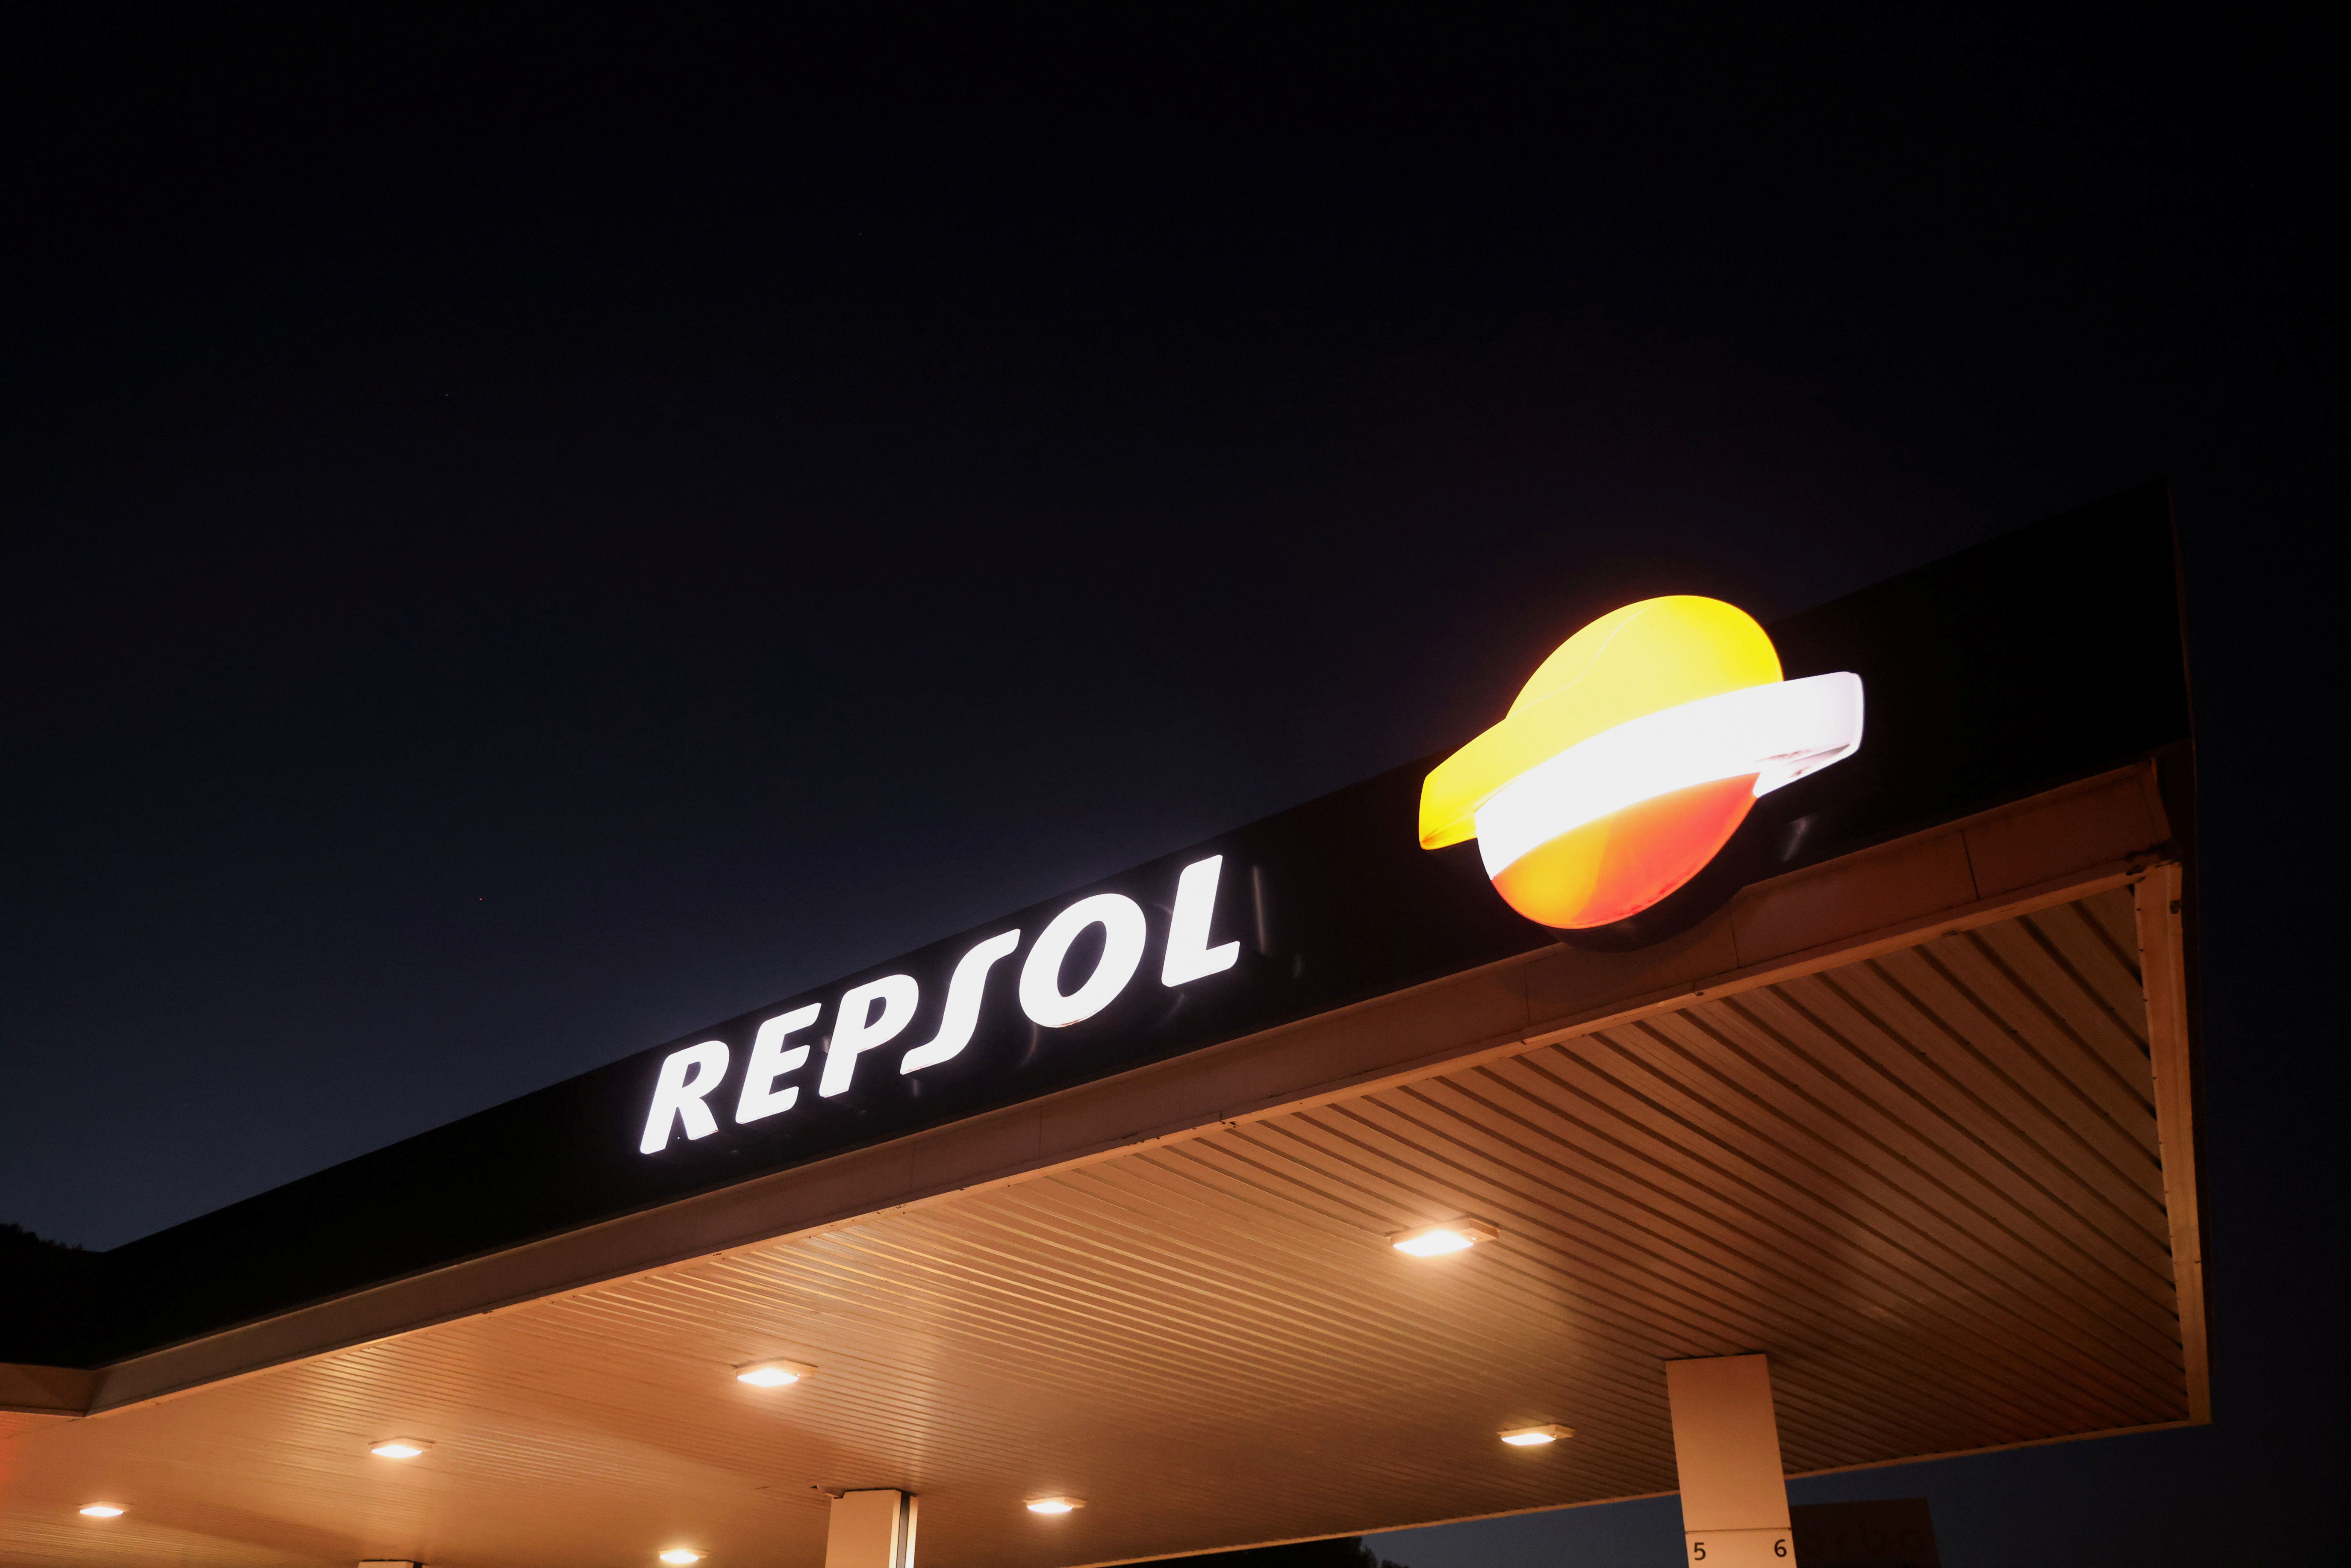 The logo of the Spanish energy company Repsol SA is seen at a petrol station in Barcelona